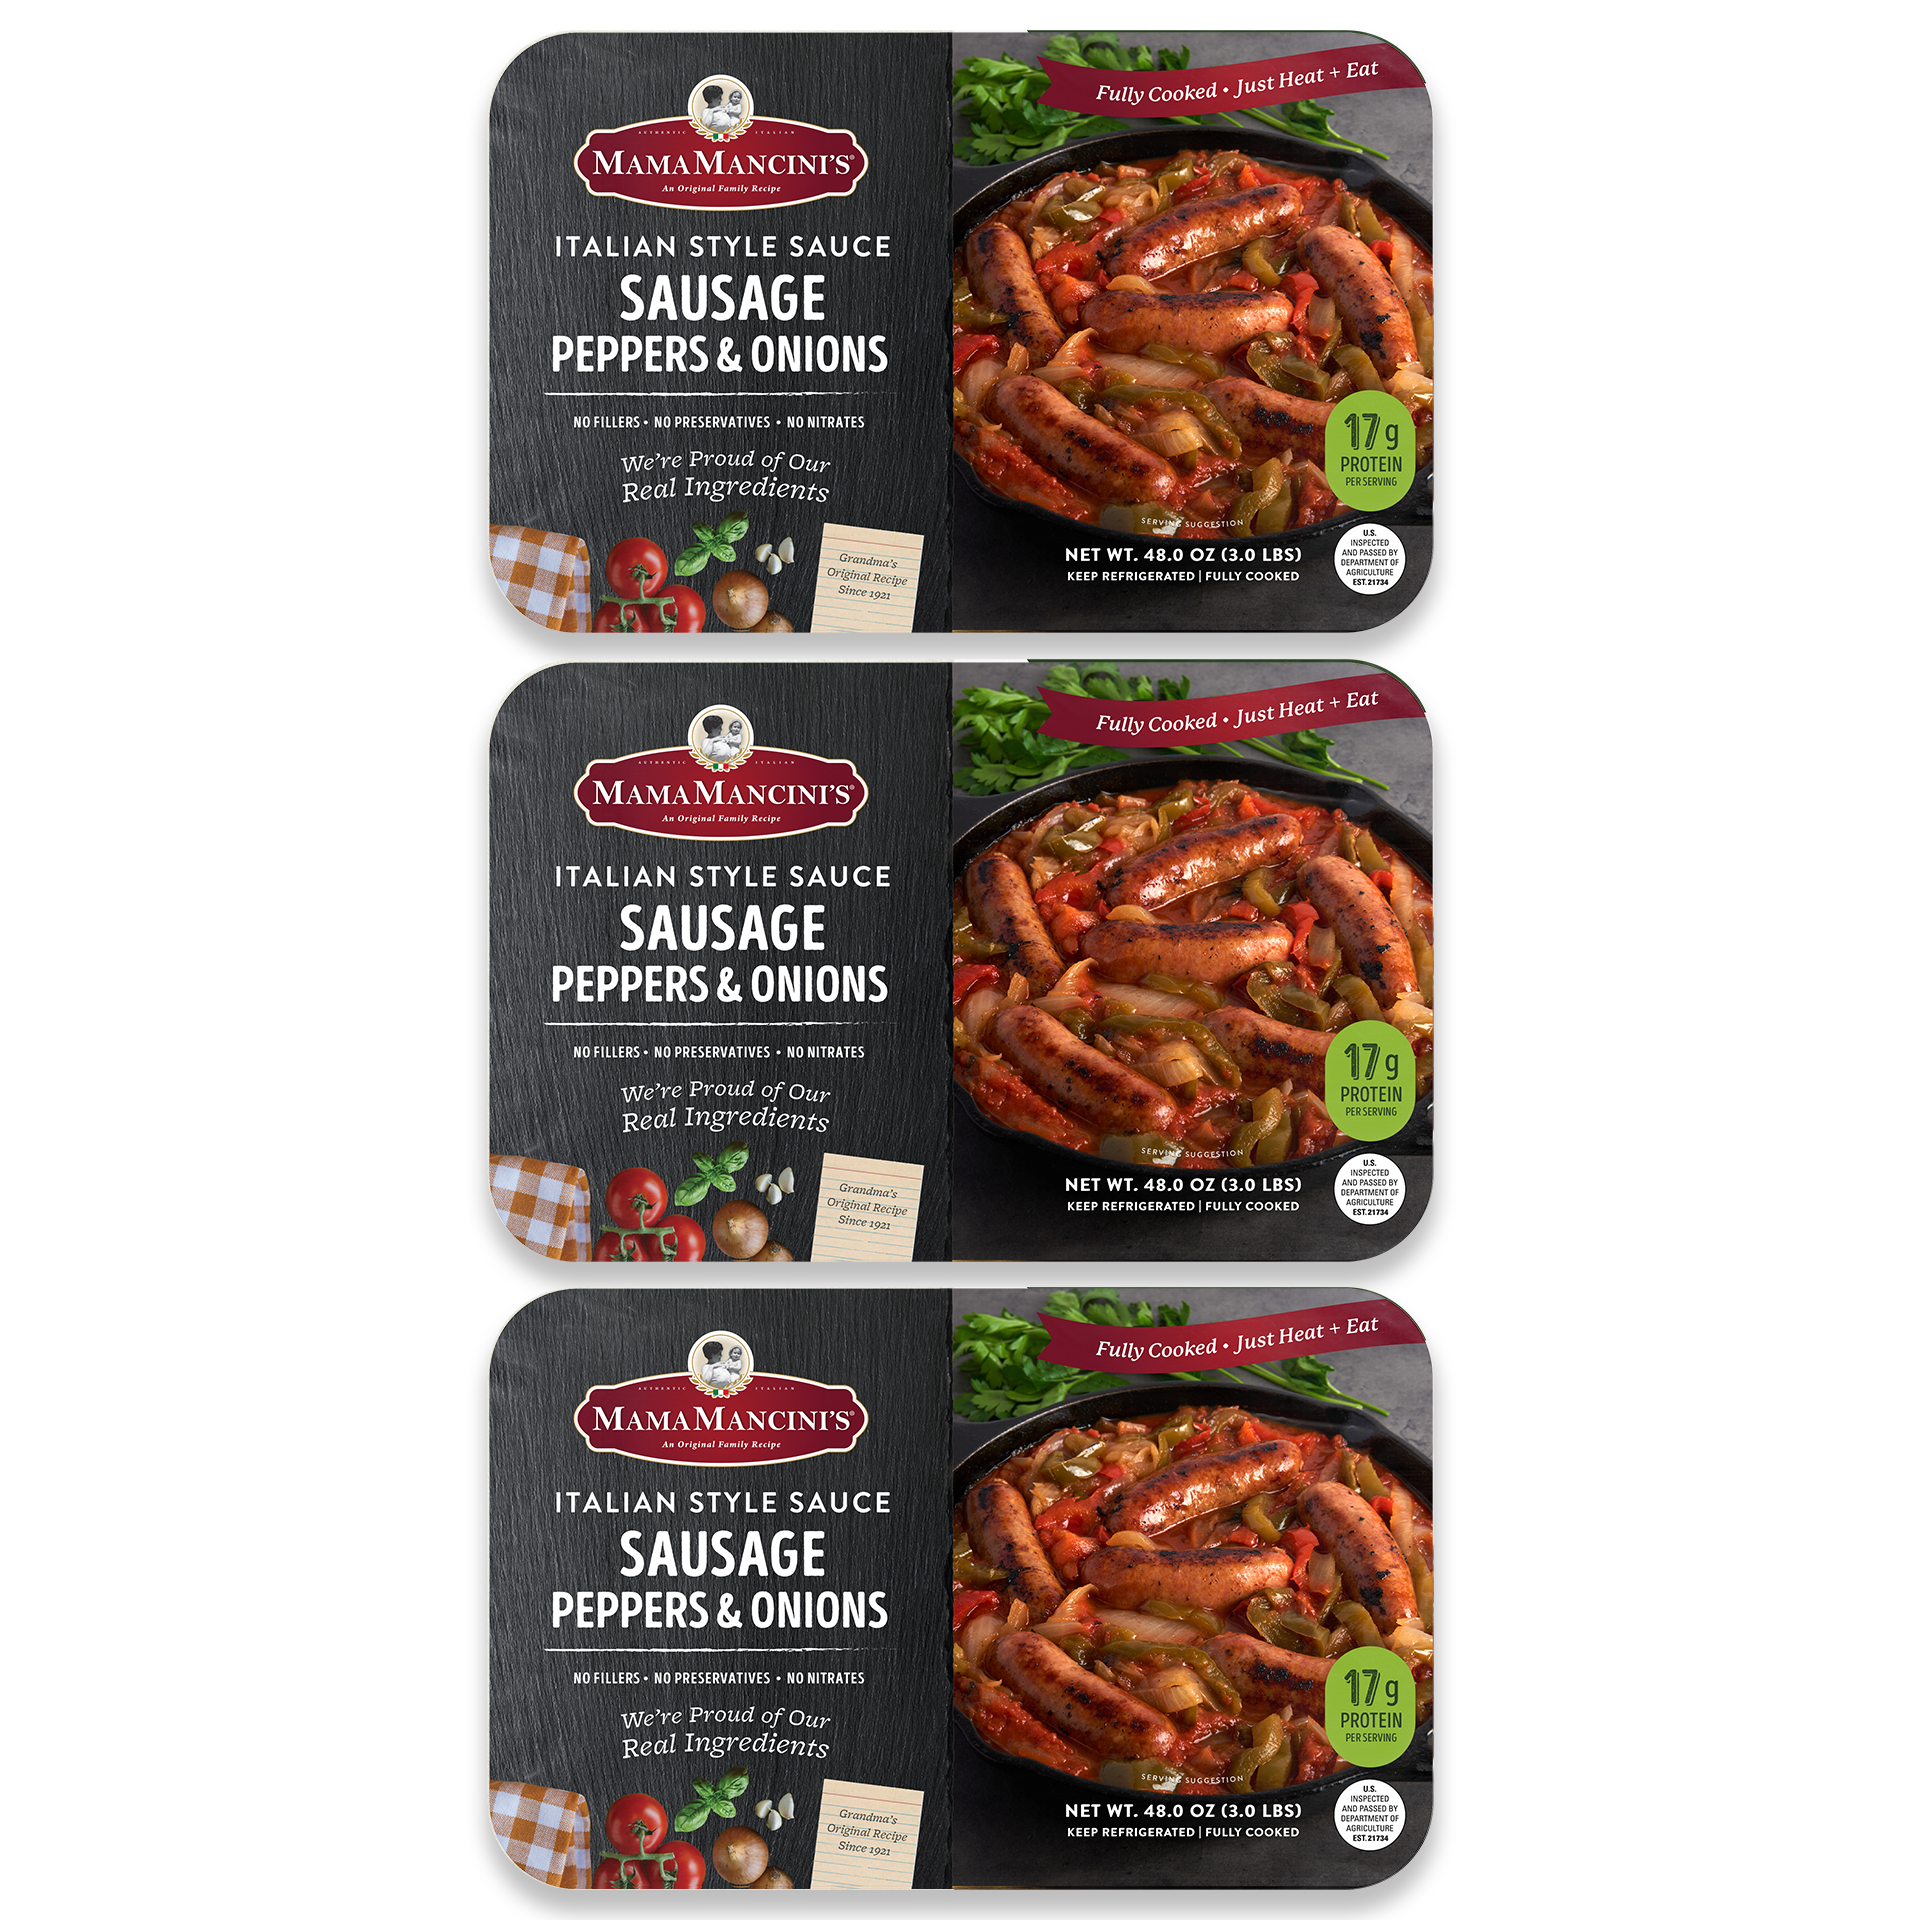 Sausage, Peppers & Onions in Italian Style Sauce (3 x 3 lb Family Meals)